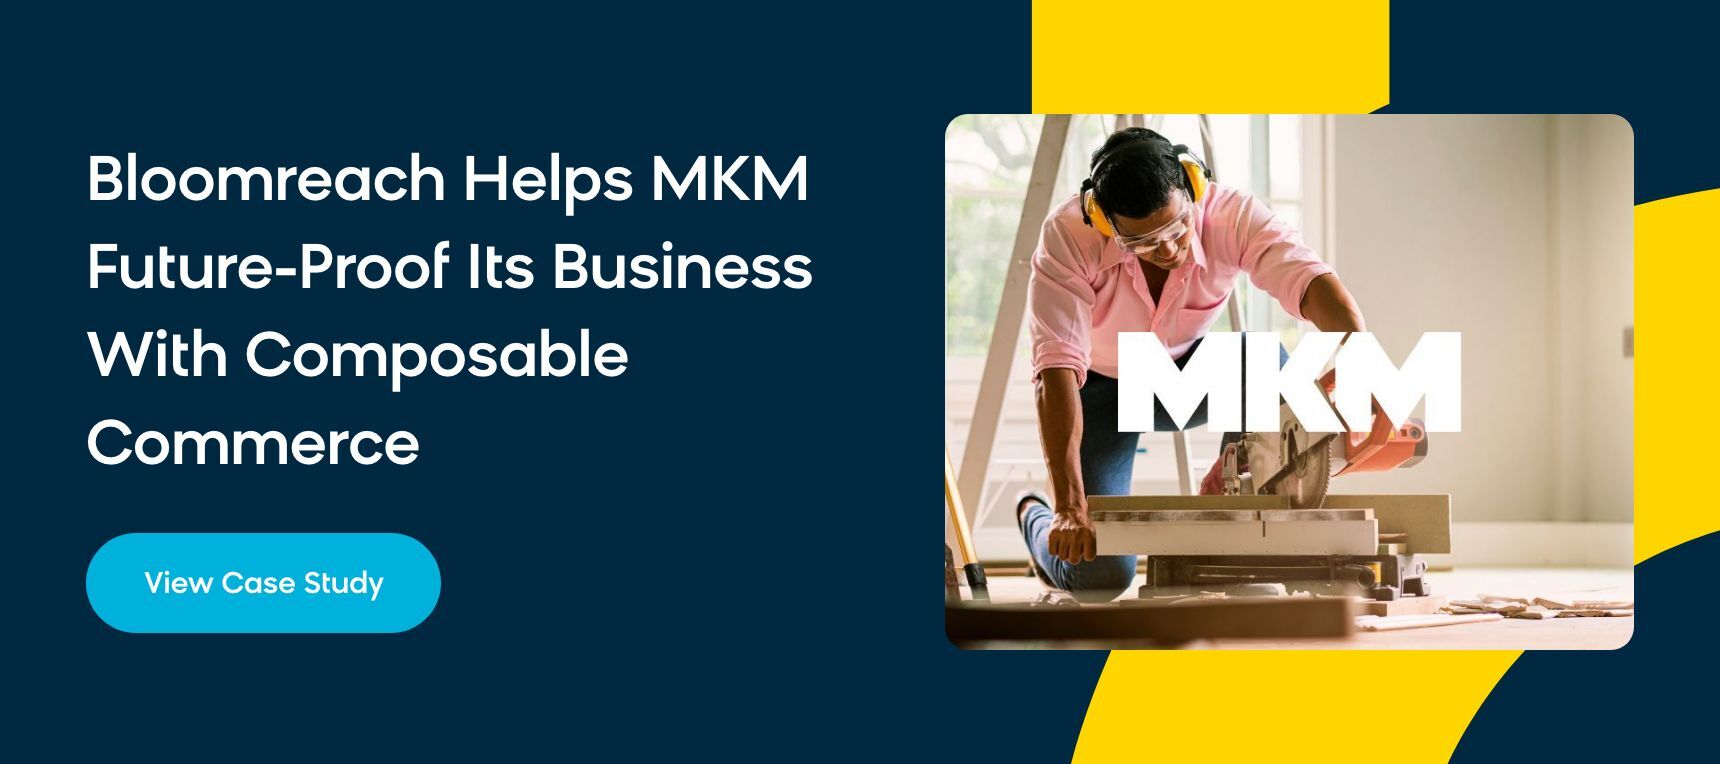 Bloomreach helps MKM future-proof its business with composable commerce